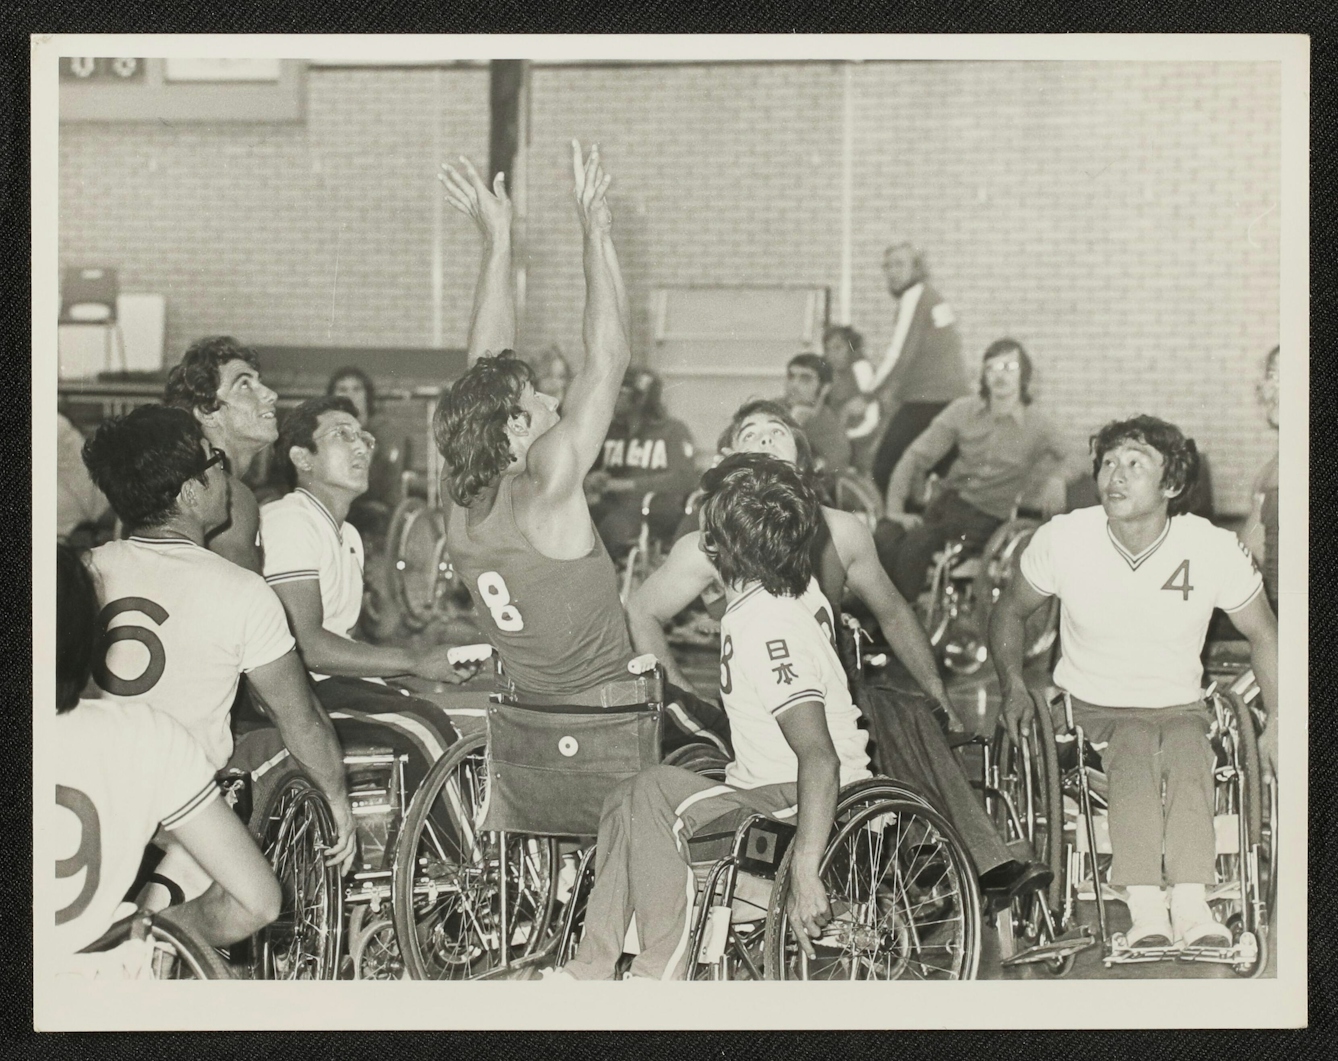 Black and white photographic print showing a wheelchair basketball match. Lots of players are clustered close together in the photograph, looking up into the air. In the centre, a man wearing a dark number 8 shirt has his arms flung upwards as though he has just released the ball for a shot at the net. In the background, spectators seated in front of the brickwork walls look towards the action.